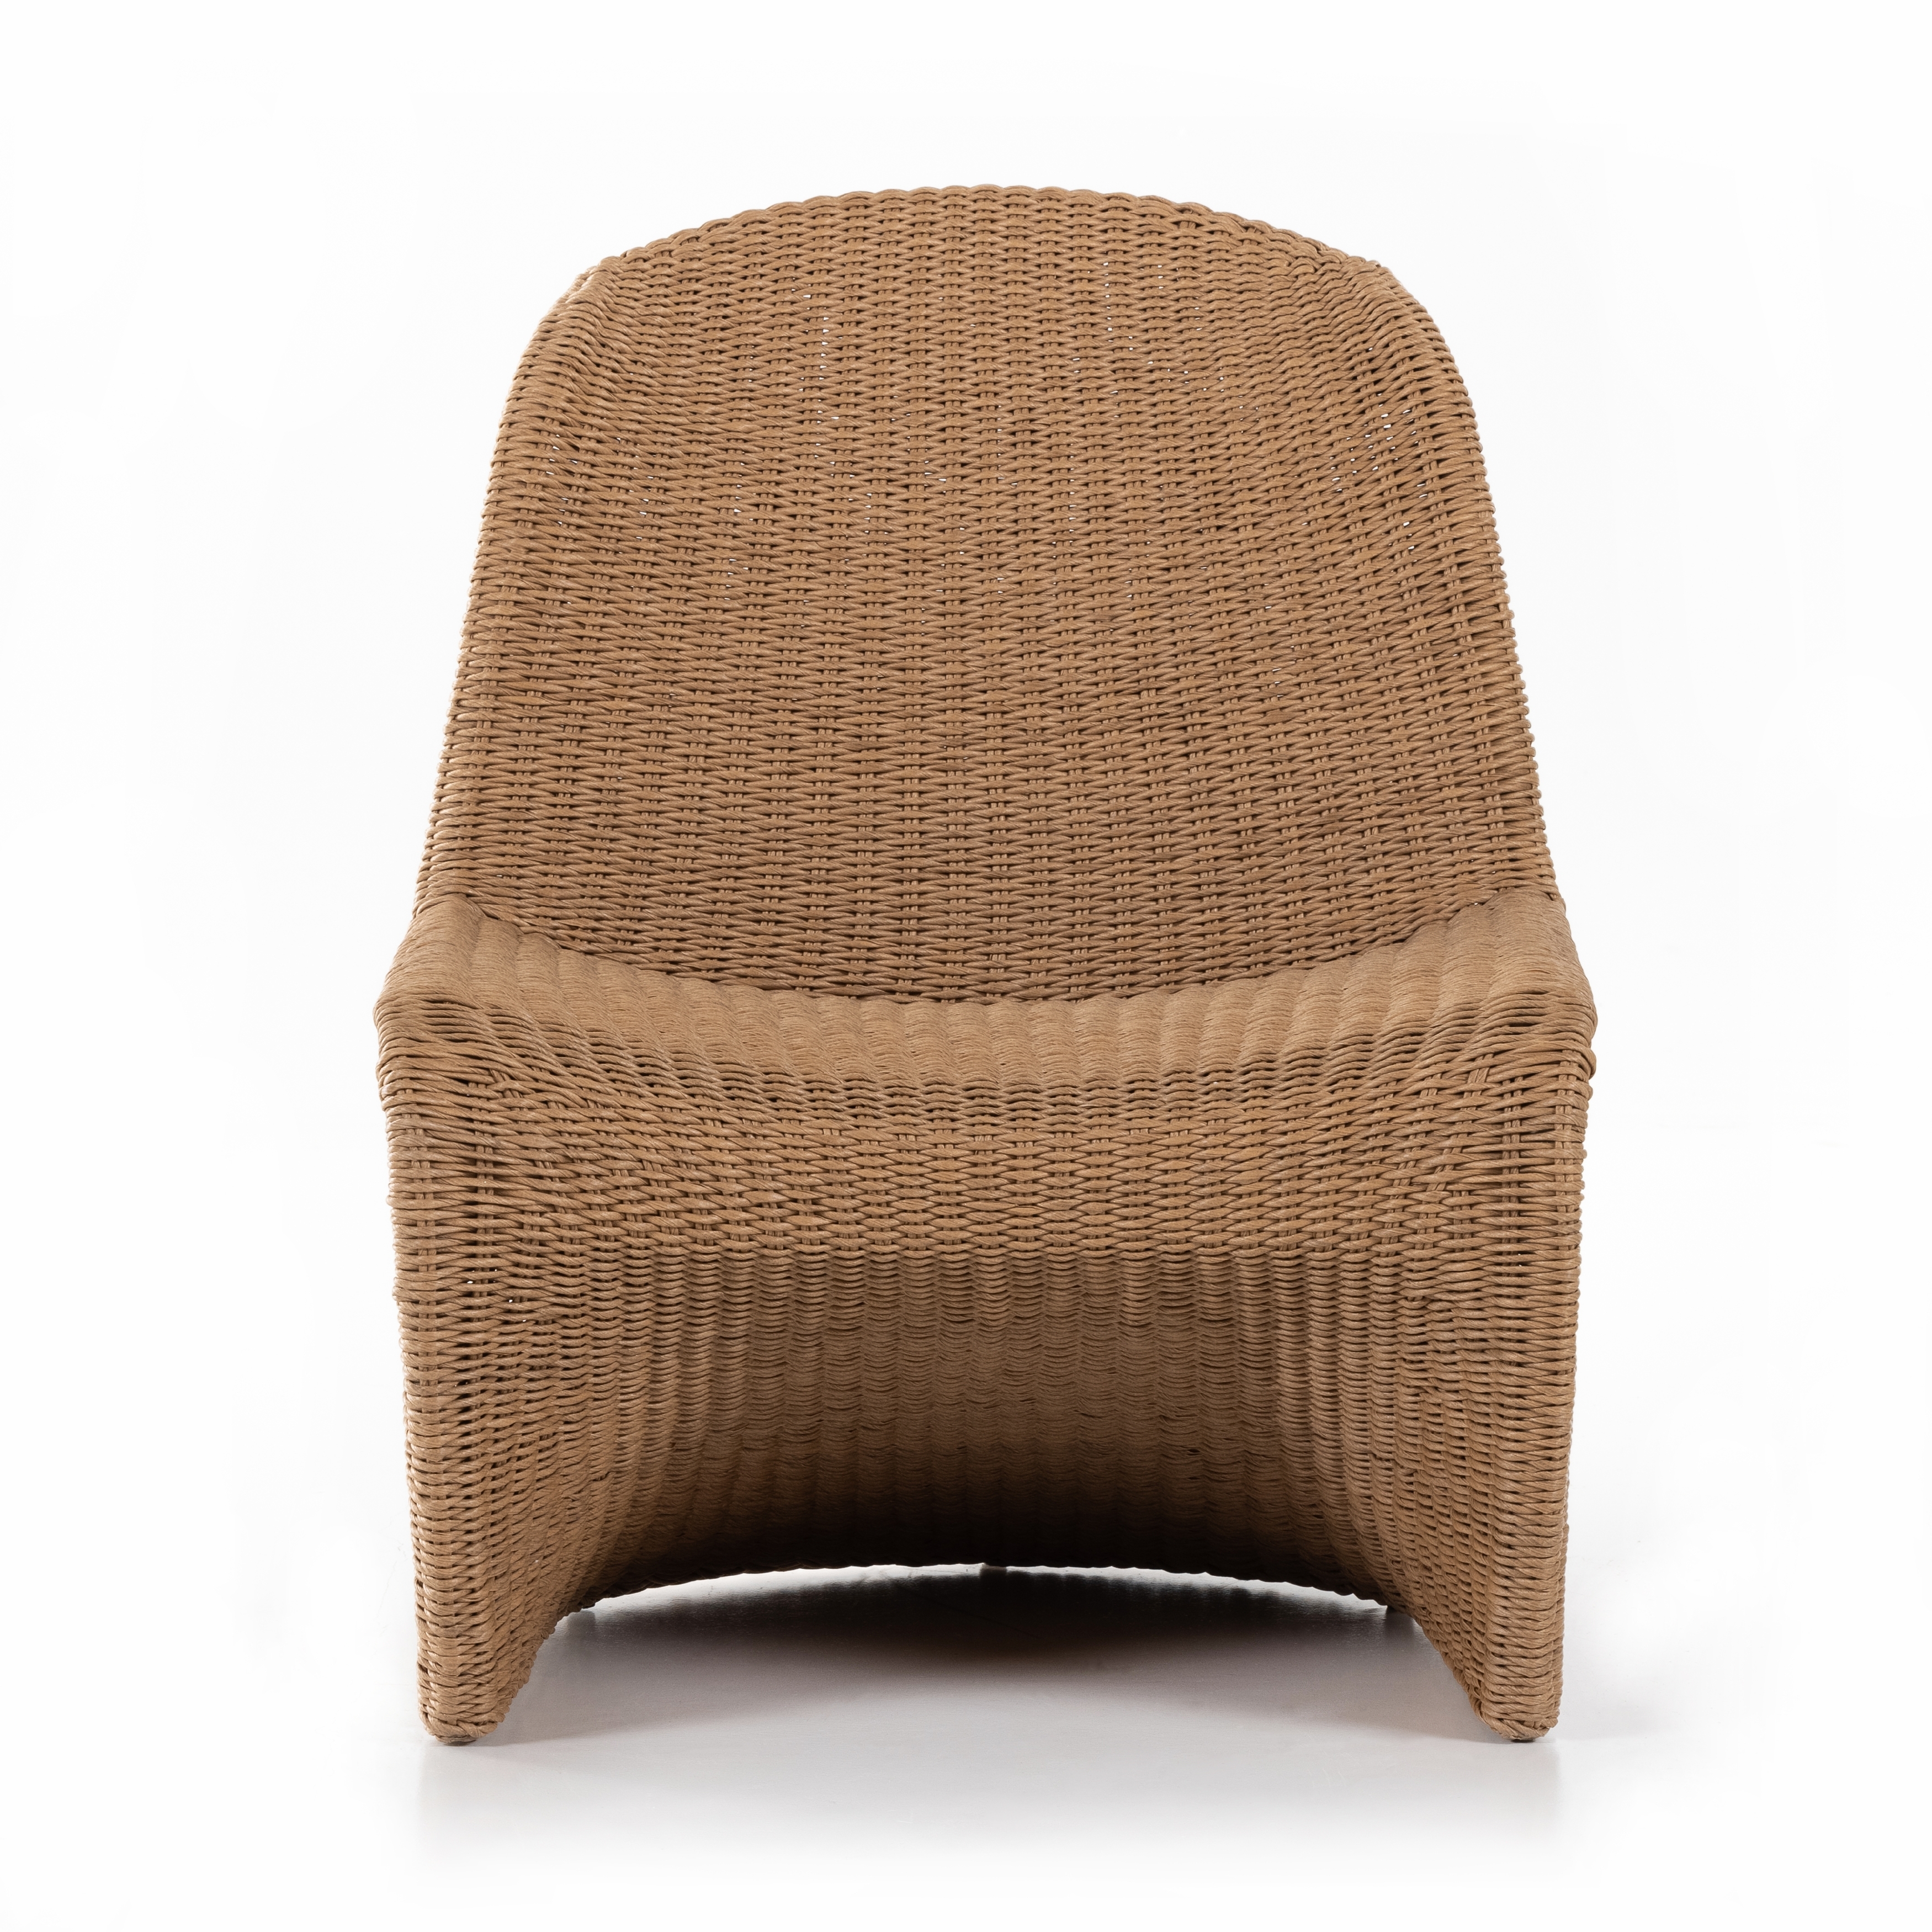 Portia Outdoor Occasional Chair-Vntg Nat - Image 3